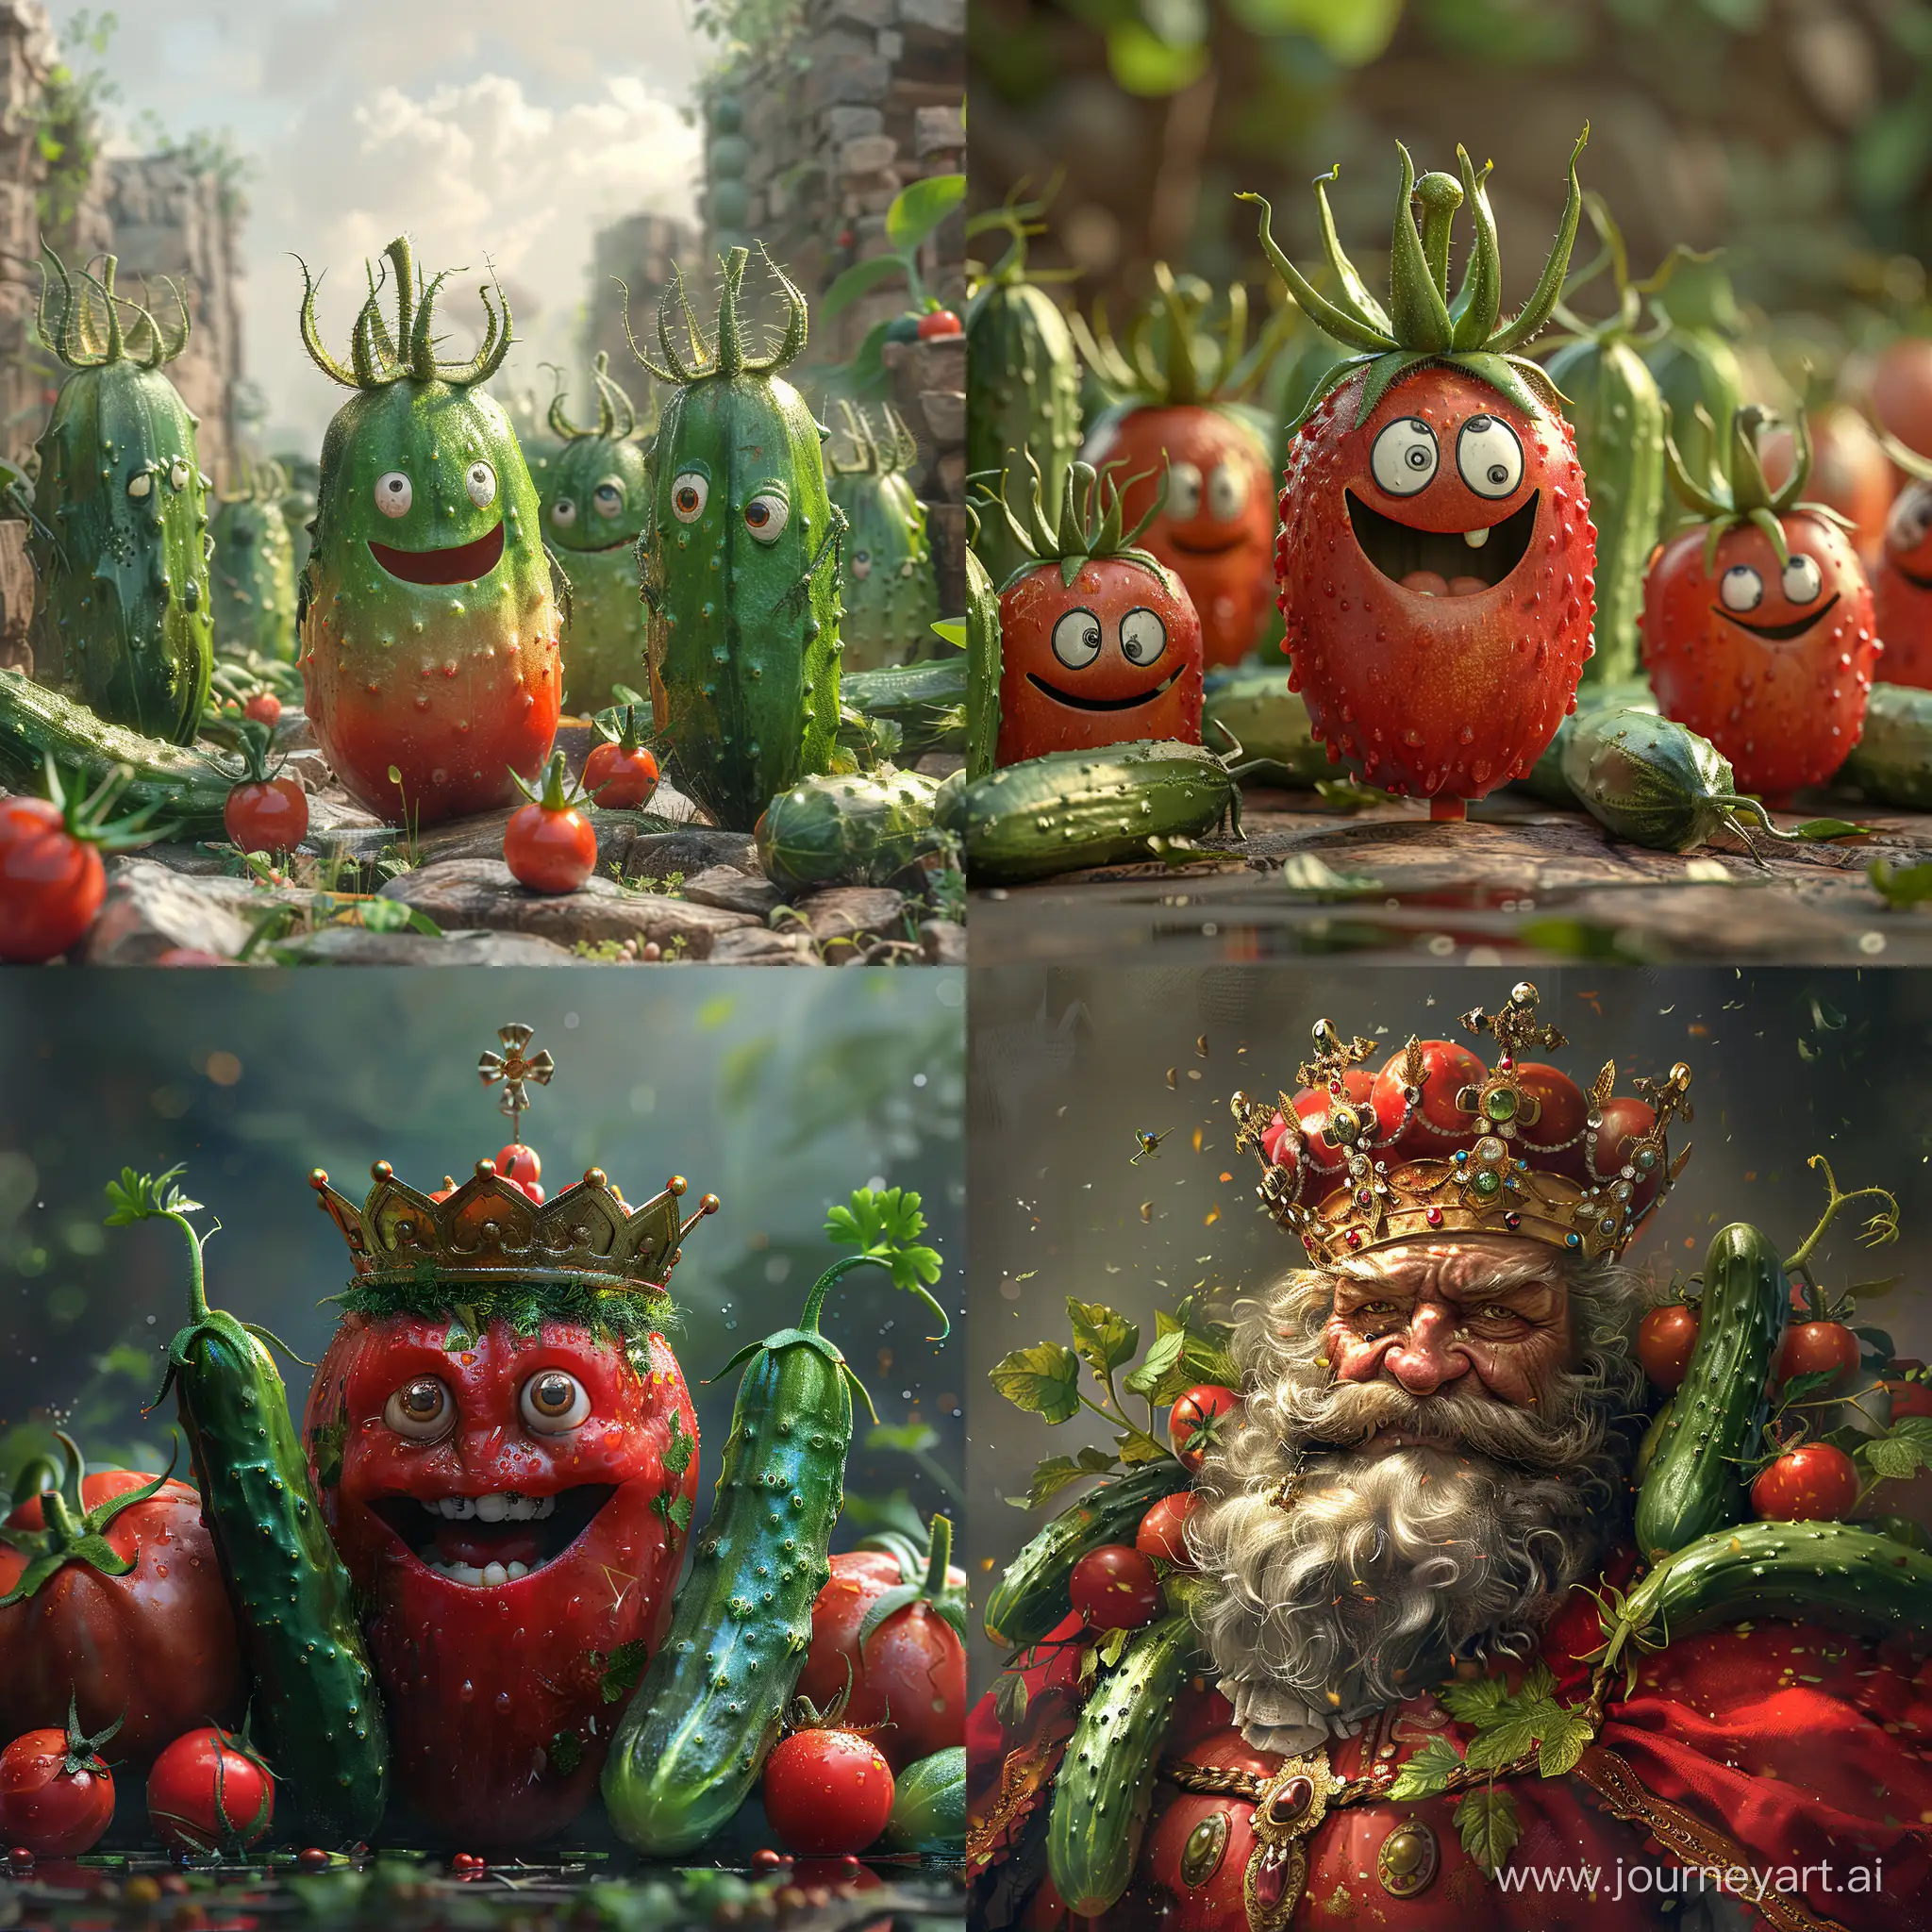 Monarch-Tomato-Leading-Cucumber-Army-in-Majestic-Battle-Formation